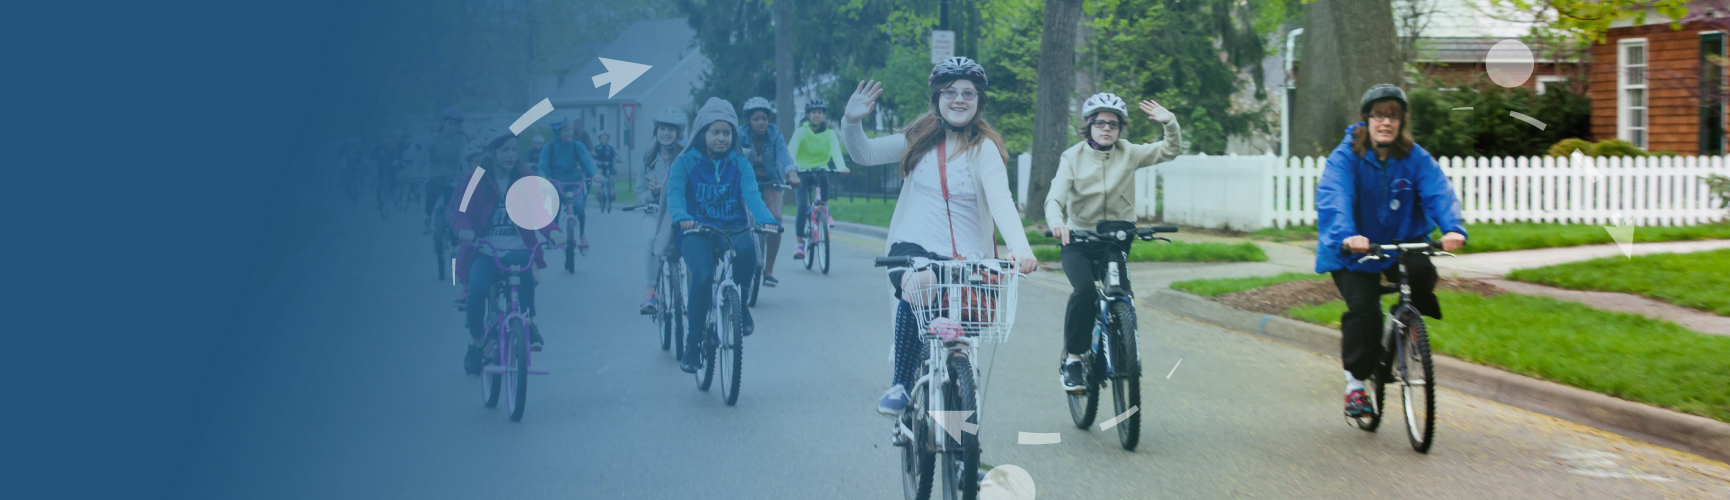 Group of kids and one parent are bicycling while wearing helmet